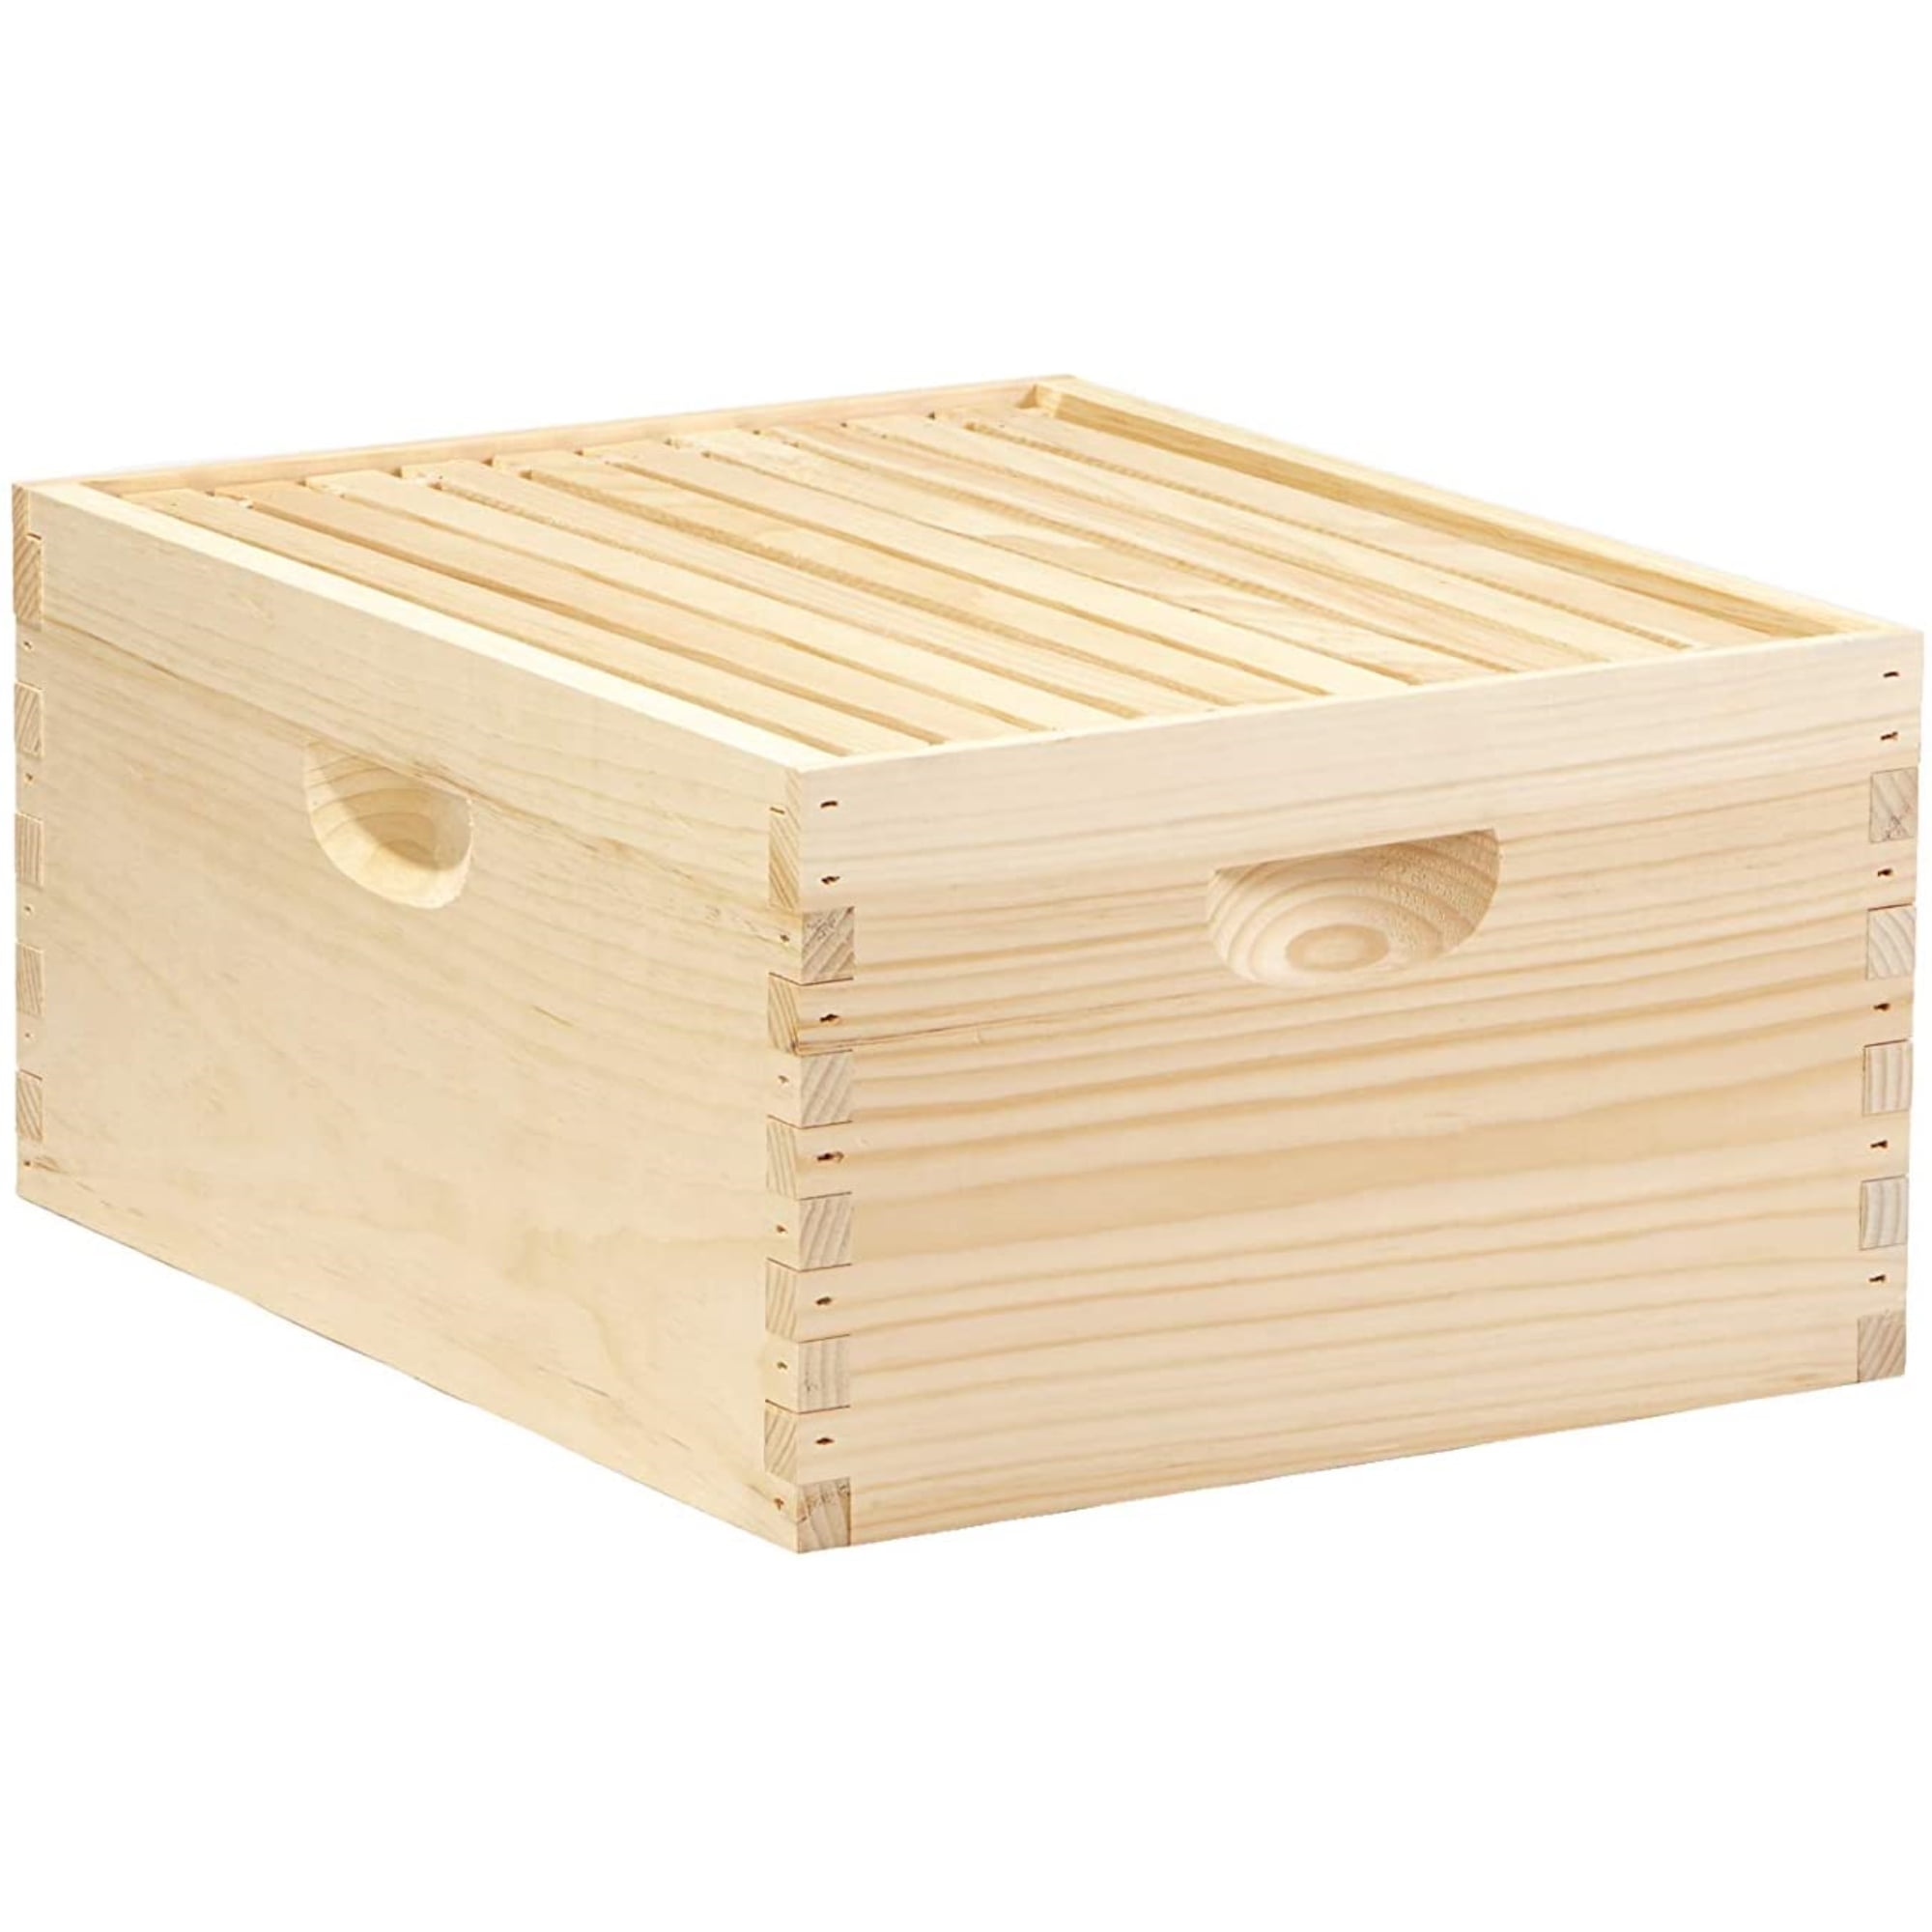 Langstroth Bee Hive 10 Frame Medium Super Frames and Foundations white plastic 